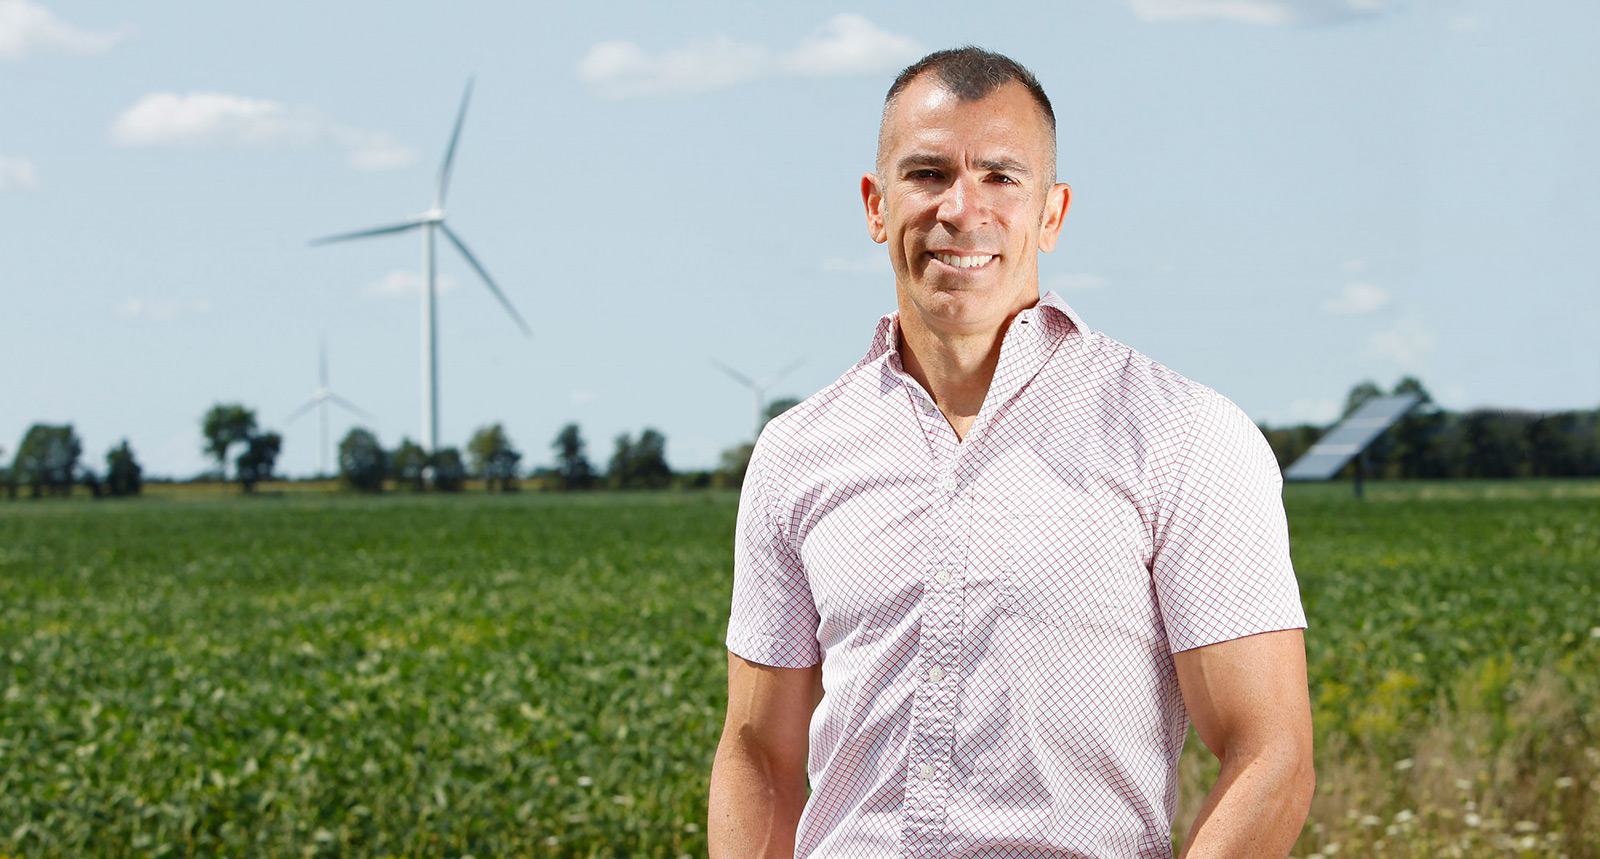 Dr Rupp Carriveau stands in front of a wind farm field